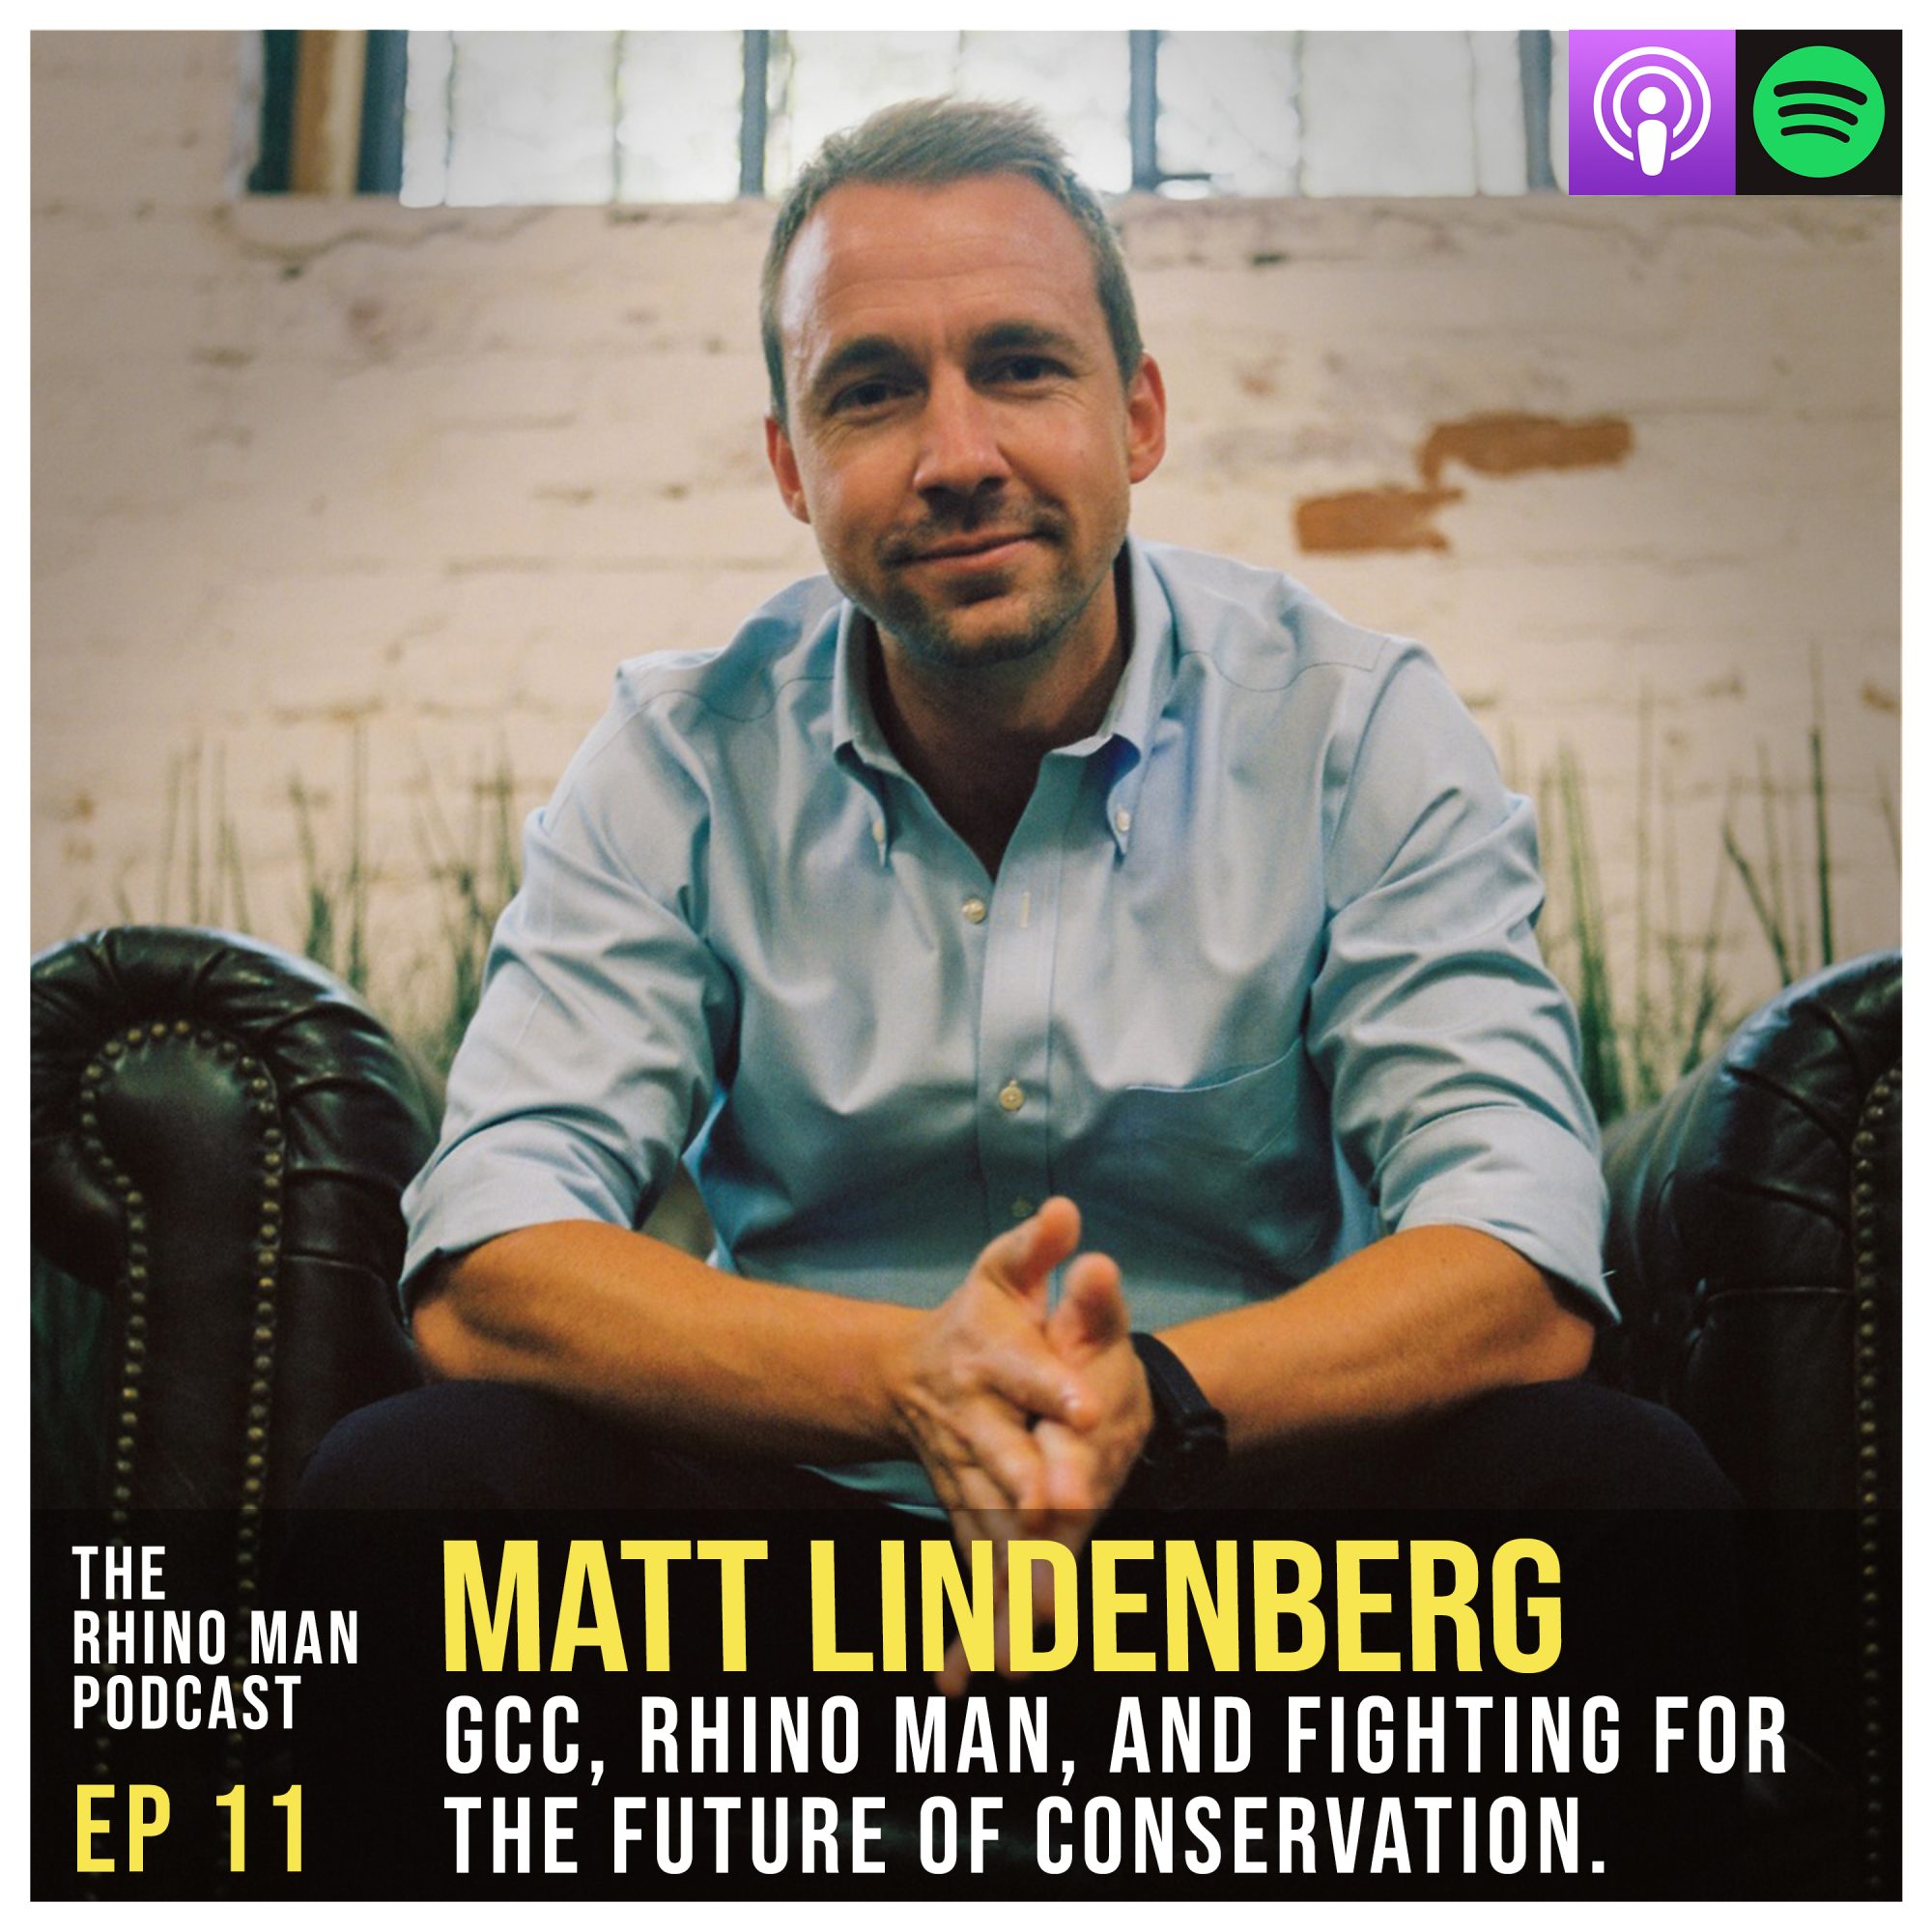 Ep 11: Matt Lindenberg – GCC, RHINO MAN, and fighting for the future of conservation.